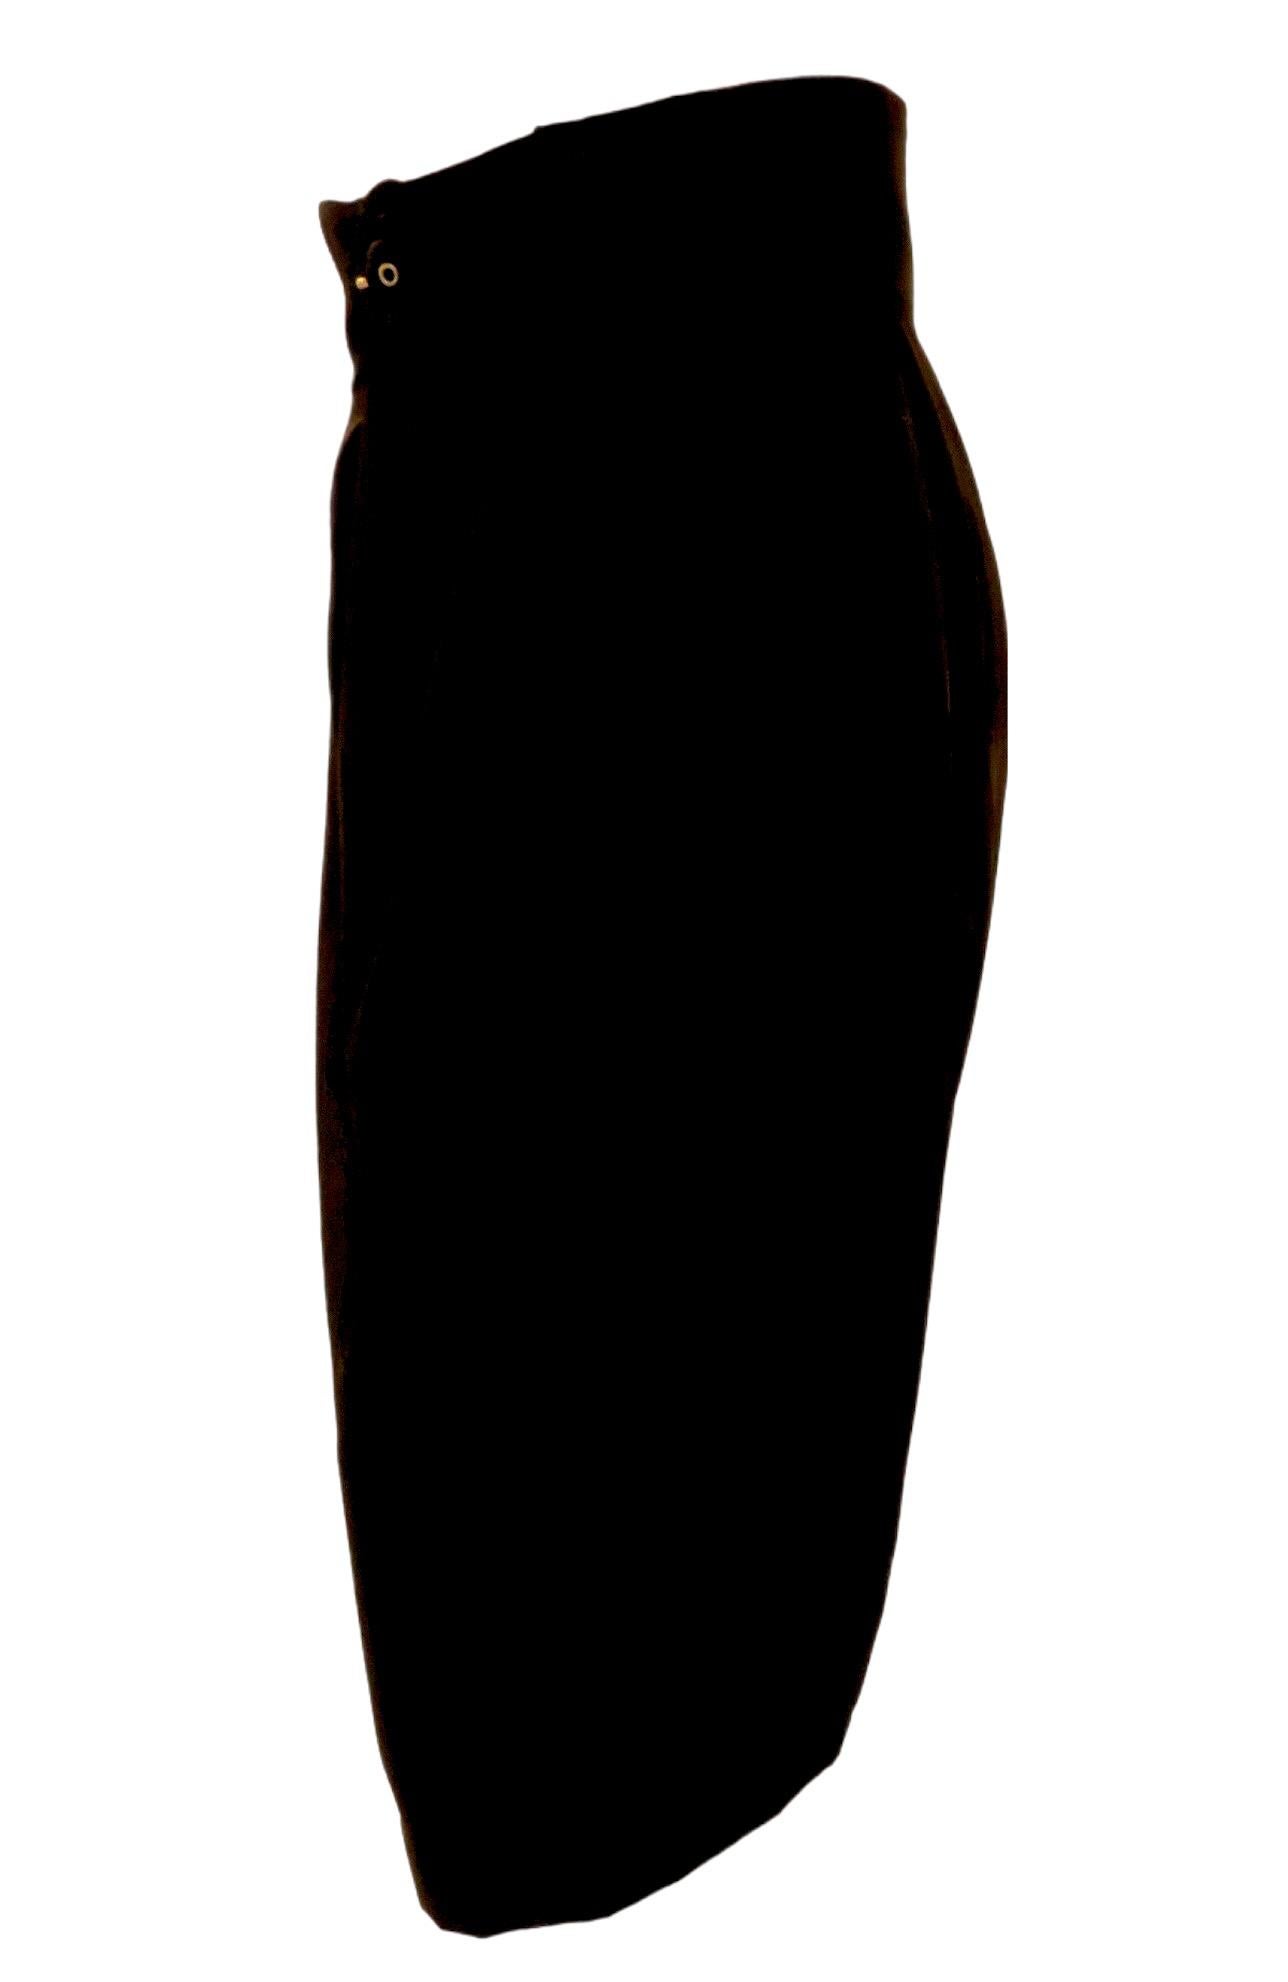 Simply classic Chantal Thomass high-waisted black pencil skirt features an attached front belt, that cinches the waist, two side seam pockets, and a back zipper. Fully lined.